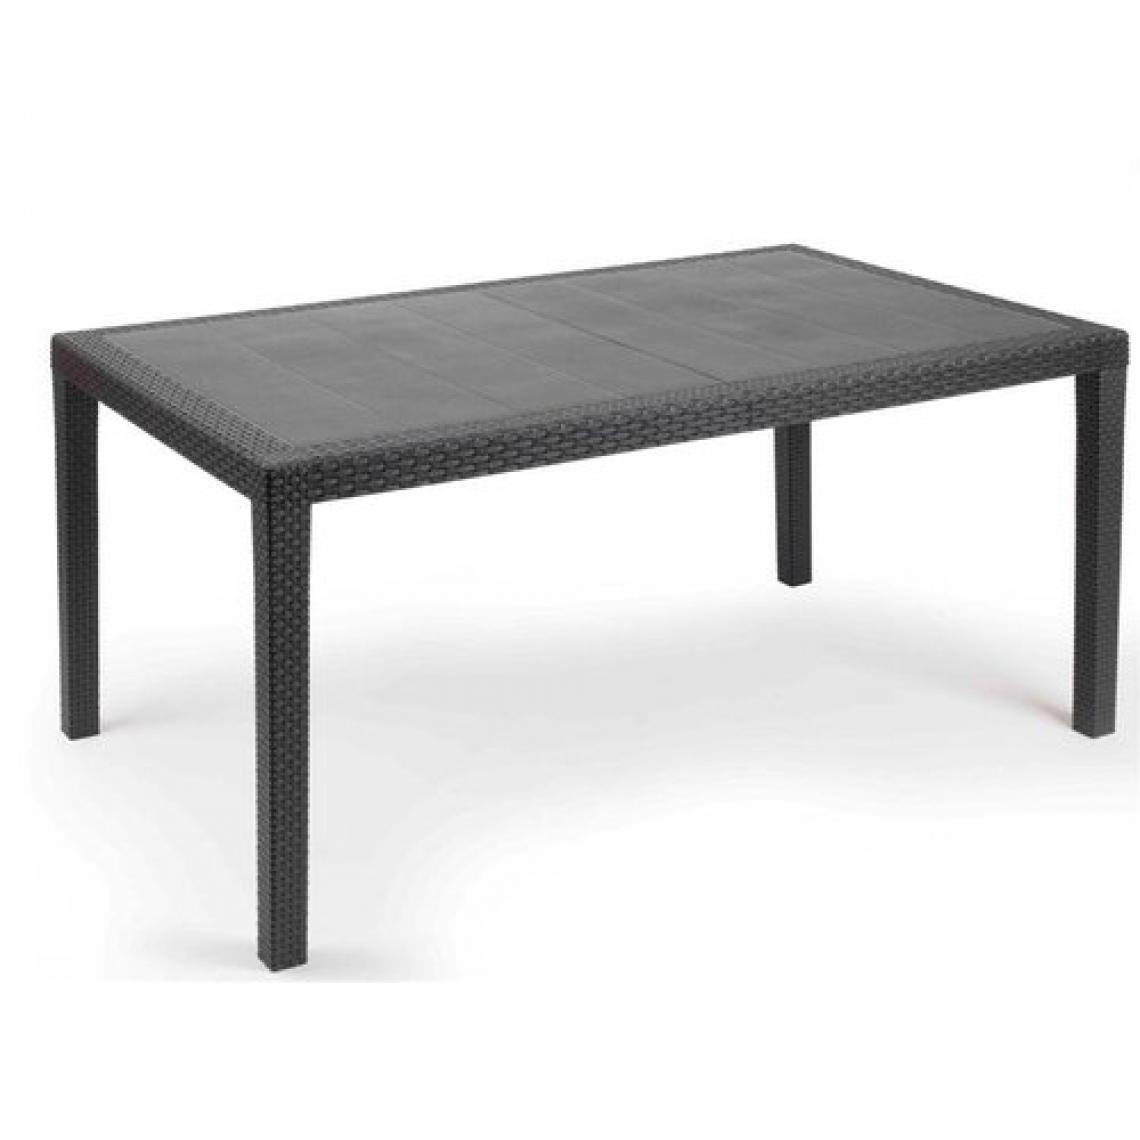 Alter - Table de jardin rectangulaire, Made in Italy, 138x78x72 cm, couleur Anthracite - Tables à manger